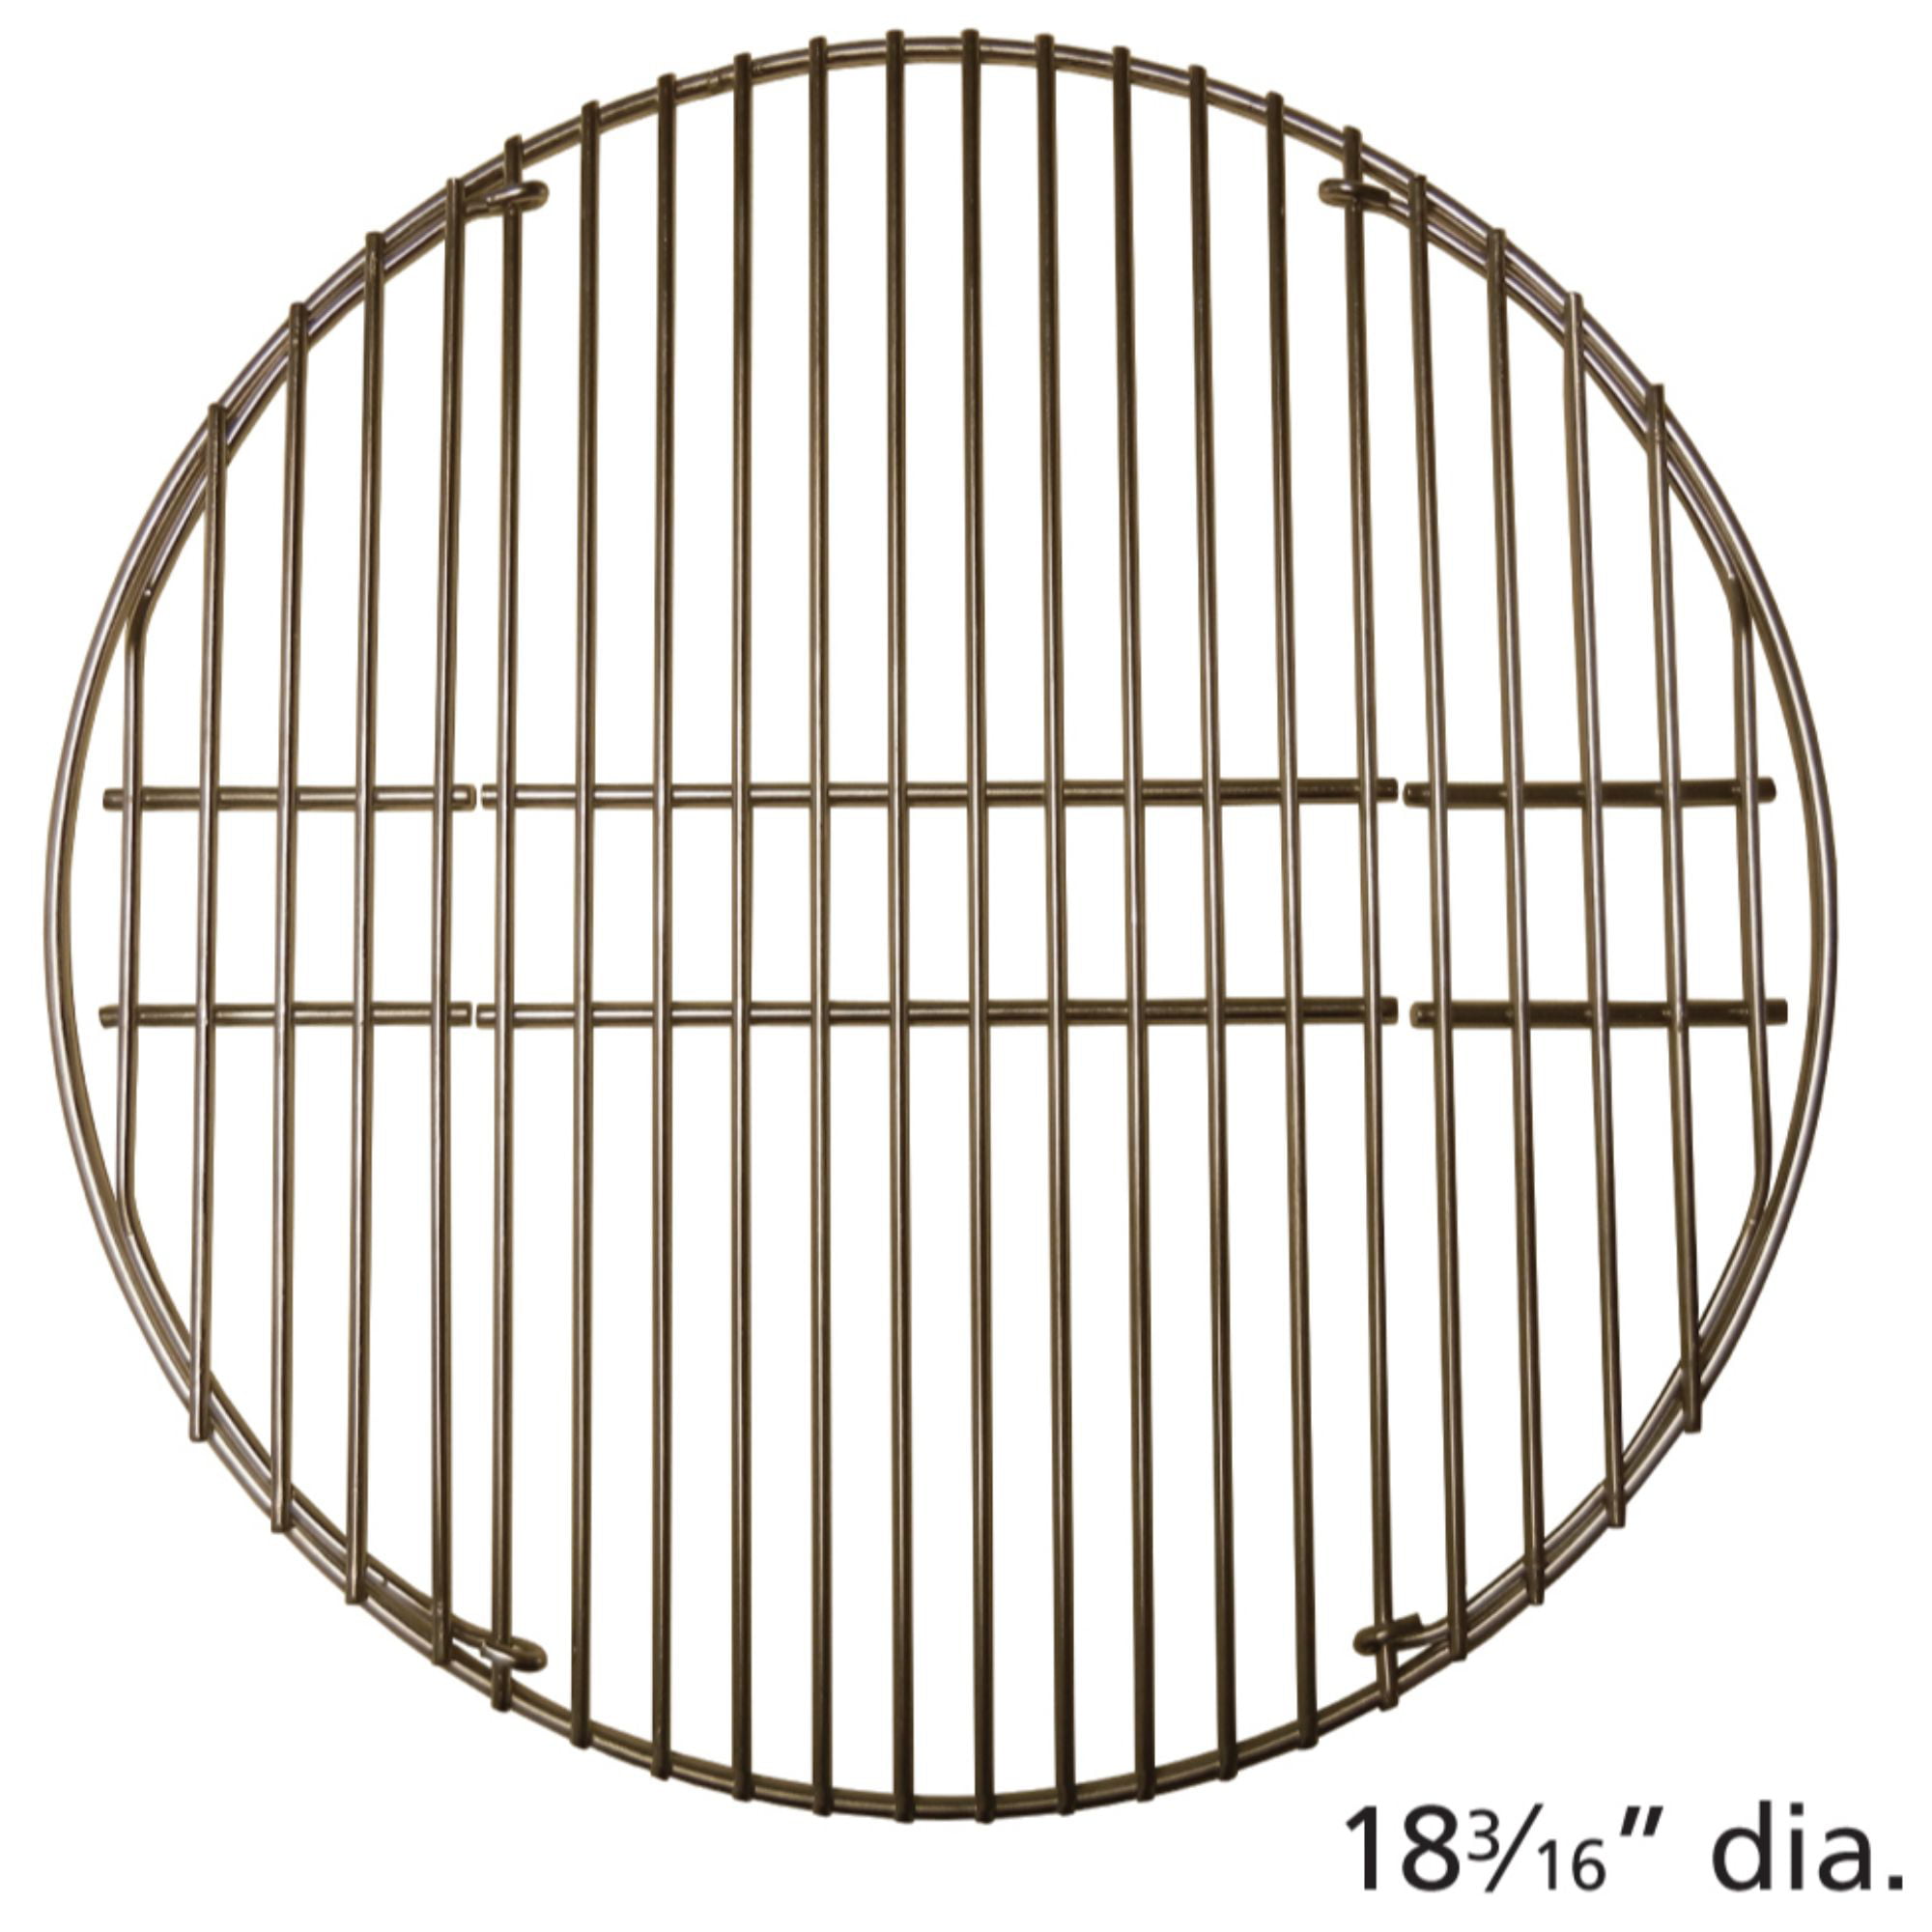 Gas Grill 18 3 16 Stainless Steel, Stainless Steel Round Grill Grates